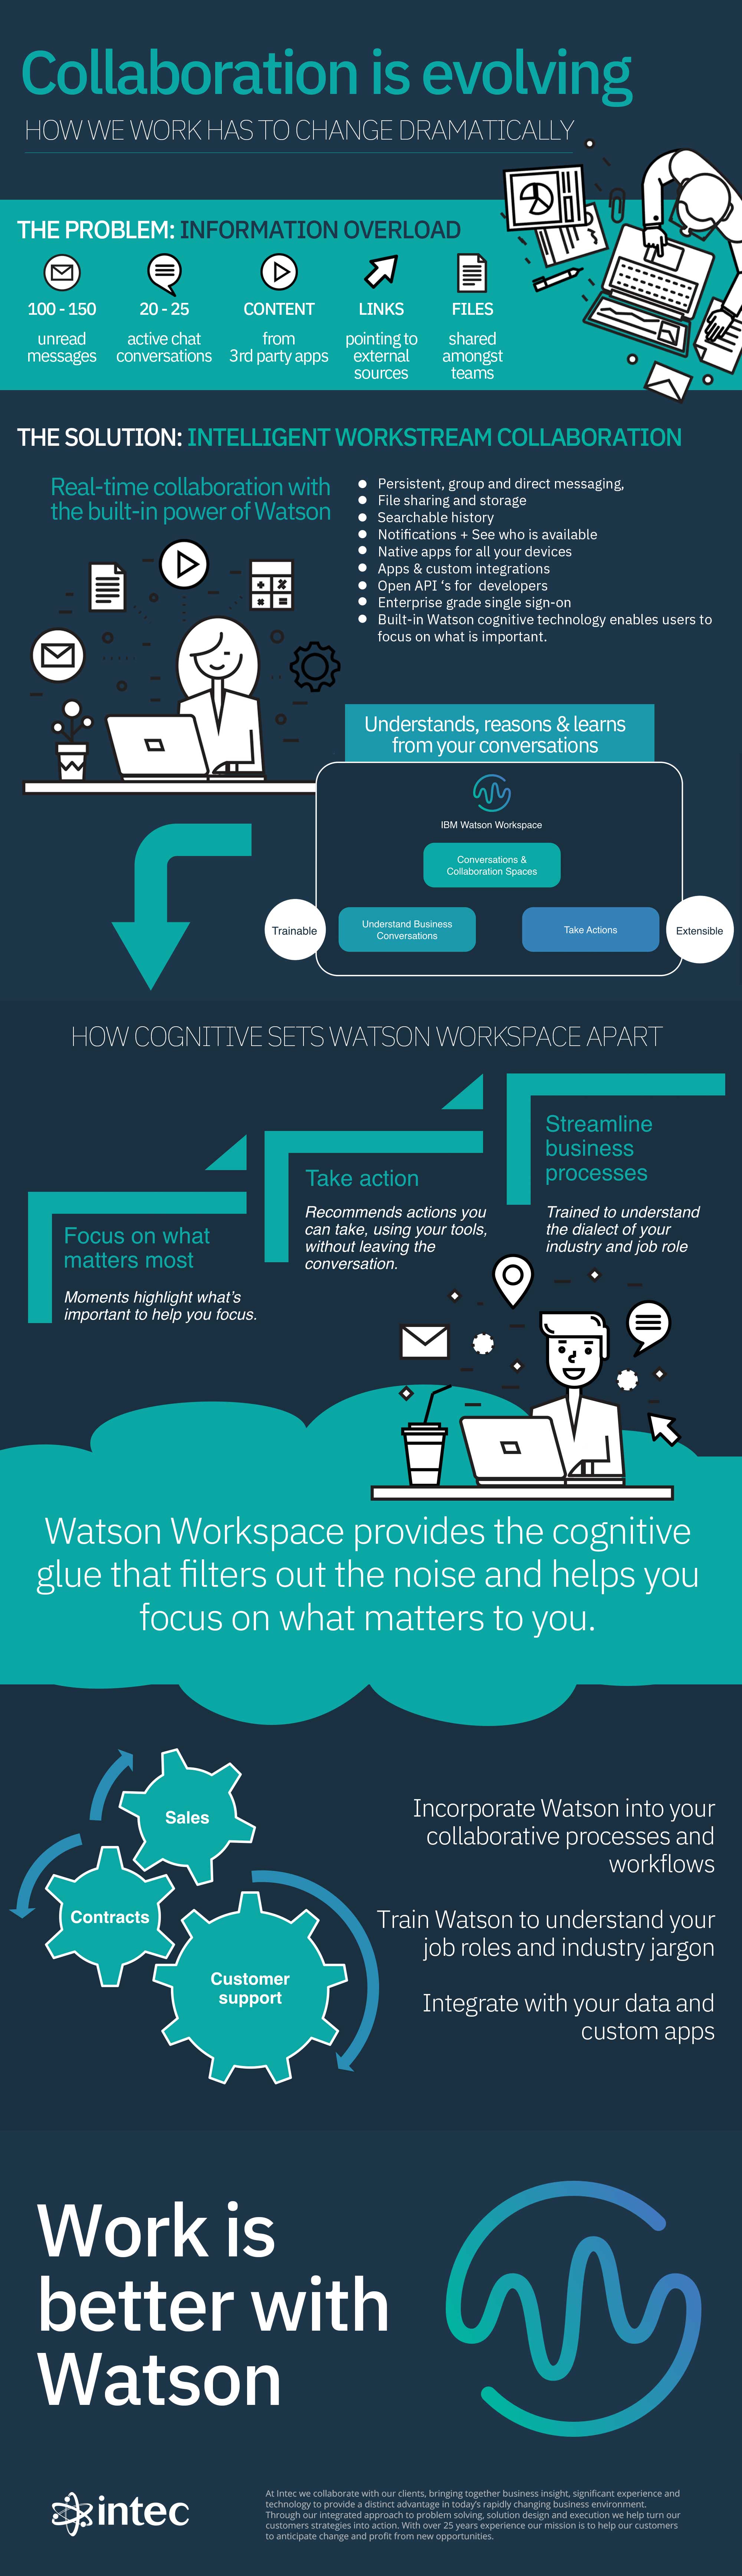 IBM Watson Workspace Infographic - Collaboration is Evolving